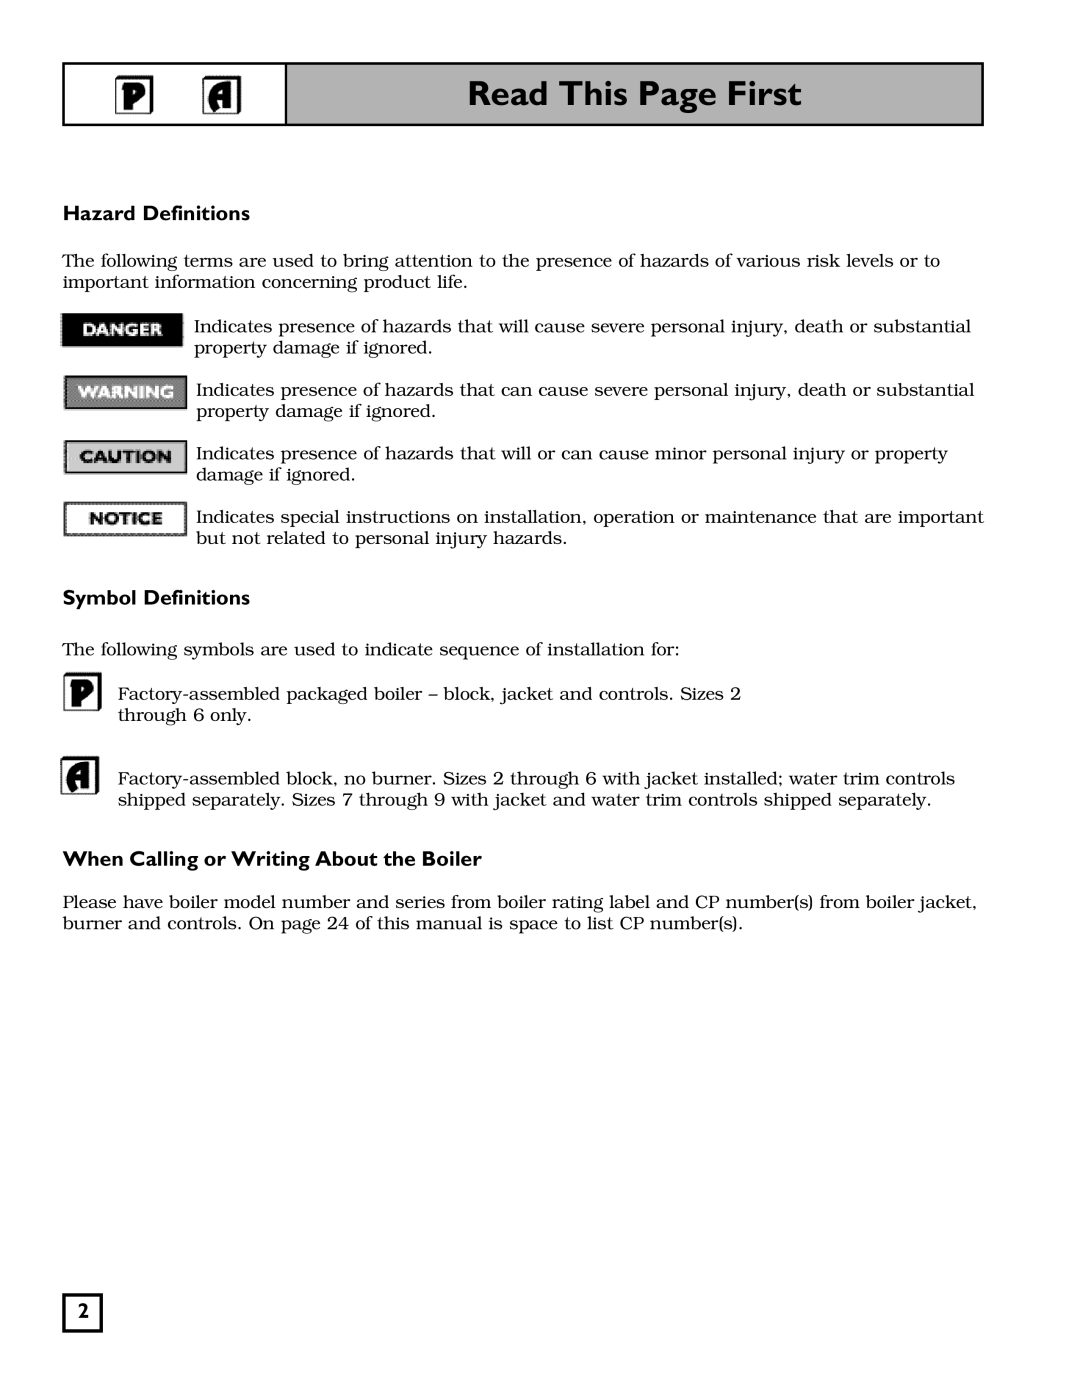 Weil-McLain 550-141-826/1201 manual Read This Page First, Hazard Definitions, Symbol Definitions 